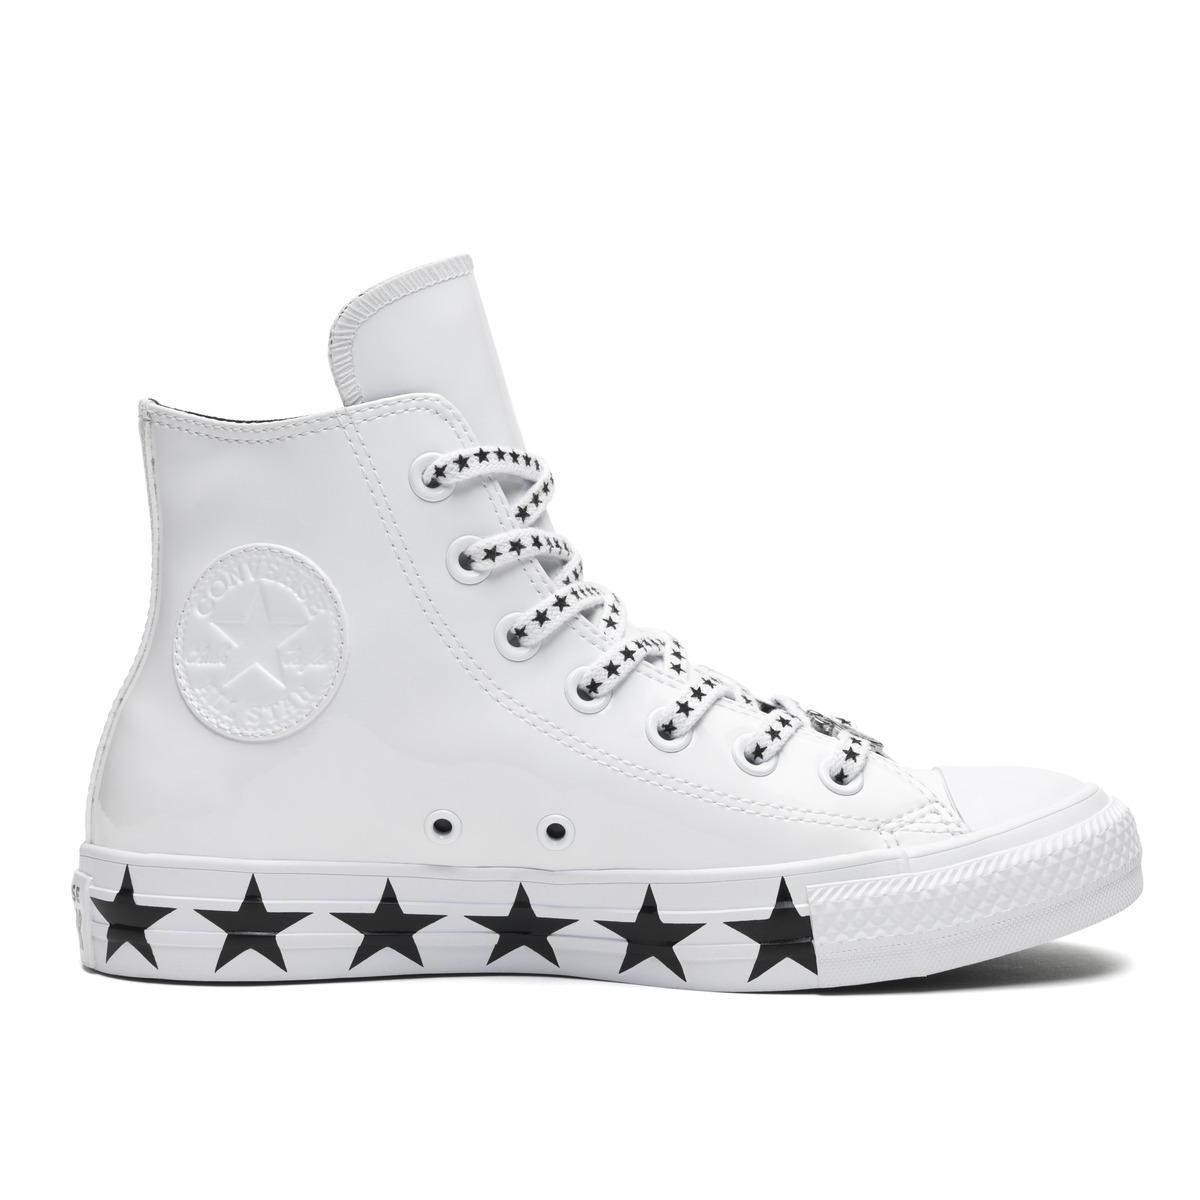 Lyst - Converse X Miley Cyrus All Star Hi in White - Save 10.0%